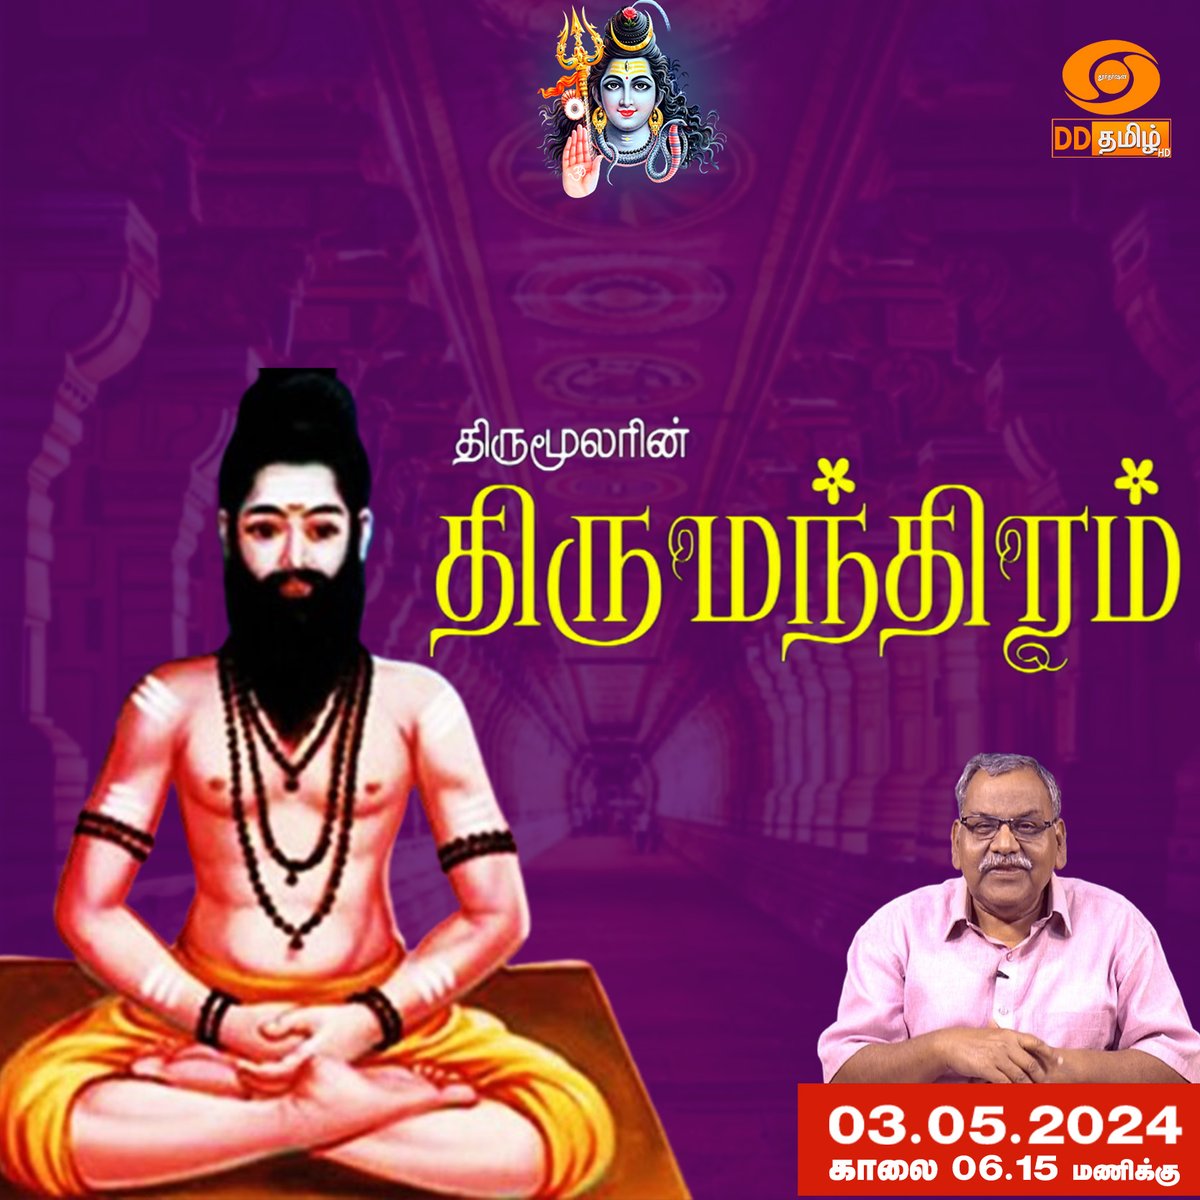 📷 Rise and Shine with #Thirumandhiram!📷 Episode-102 Join us every Morning at 6:15 AM on @DDTamilOfficial for a soulful journey into the spiritual realm. 📷📷 Let the divine wisdom guide your day! #DDtamil #SpiritualAwakening #MorningBliss #TuneIn
youtu.be/Ah6ykwa3l10